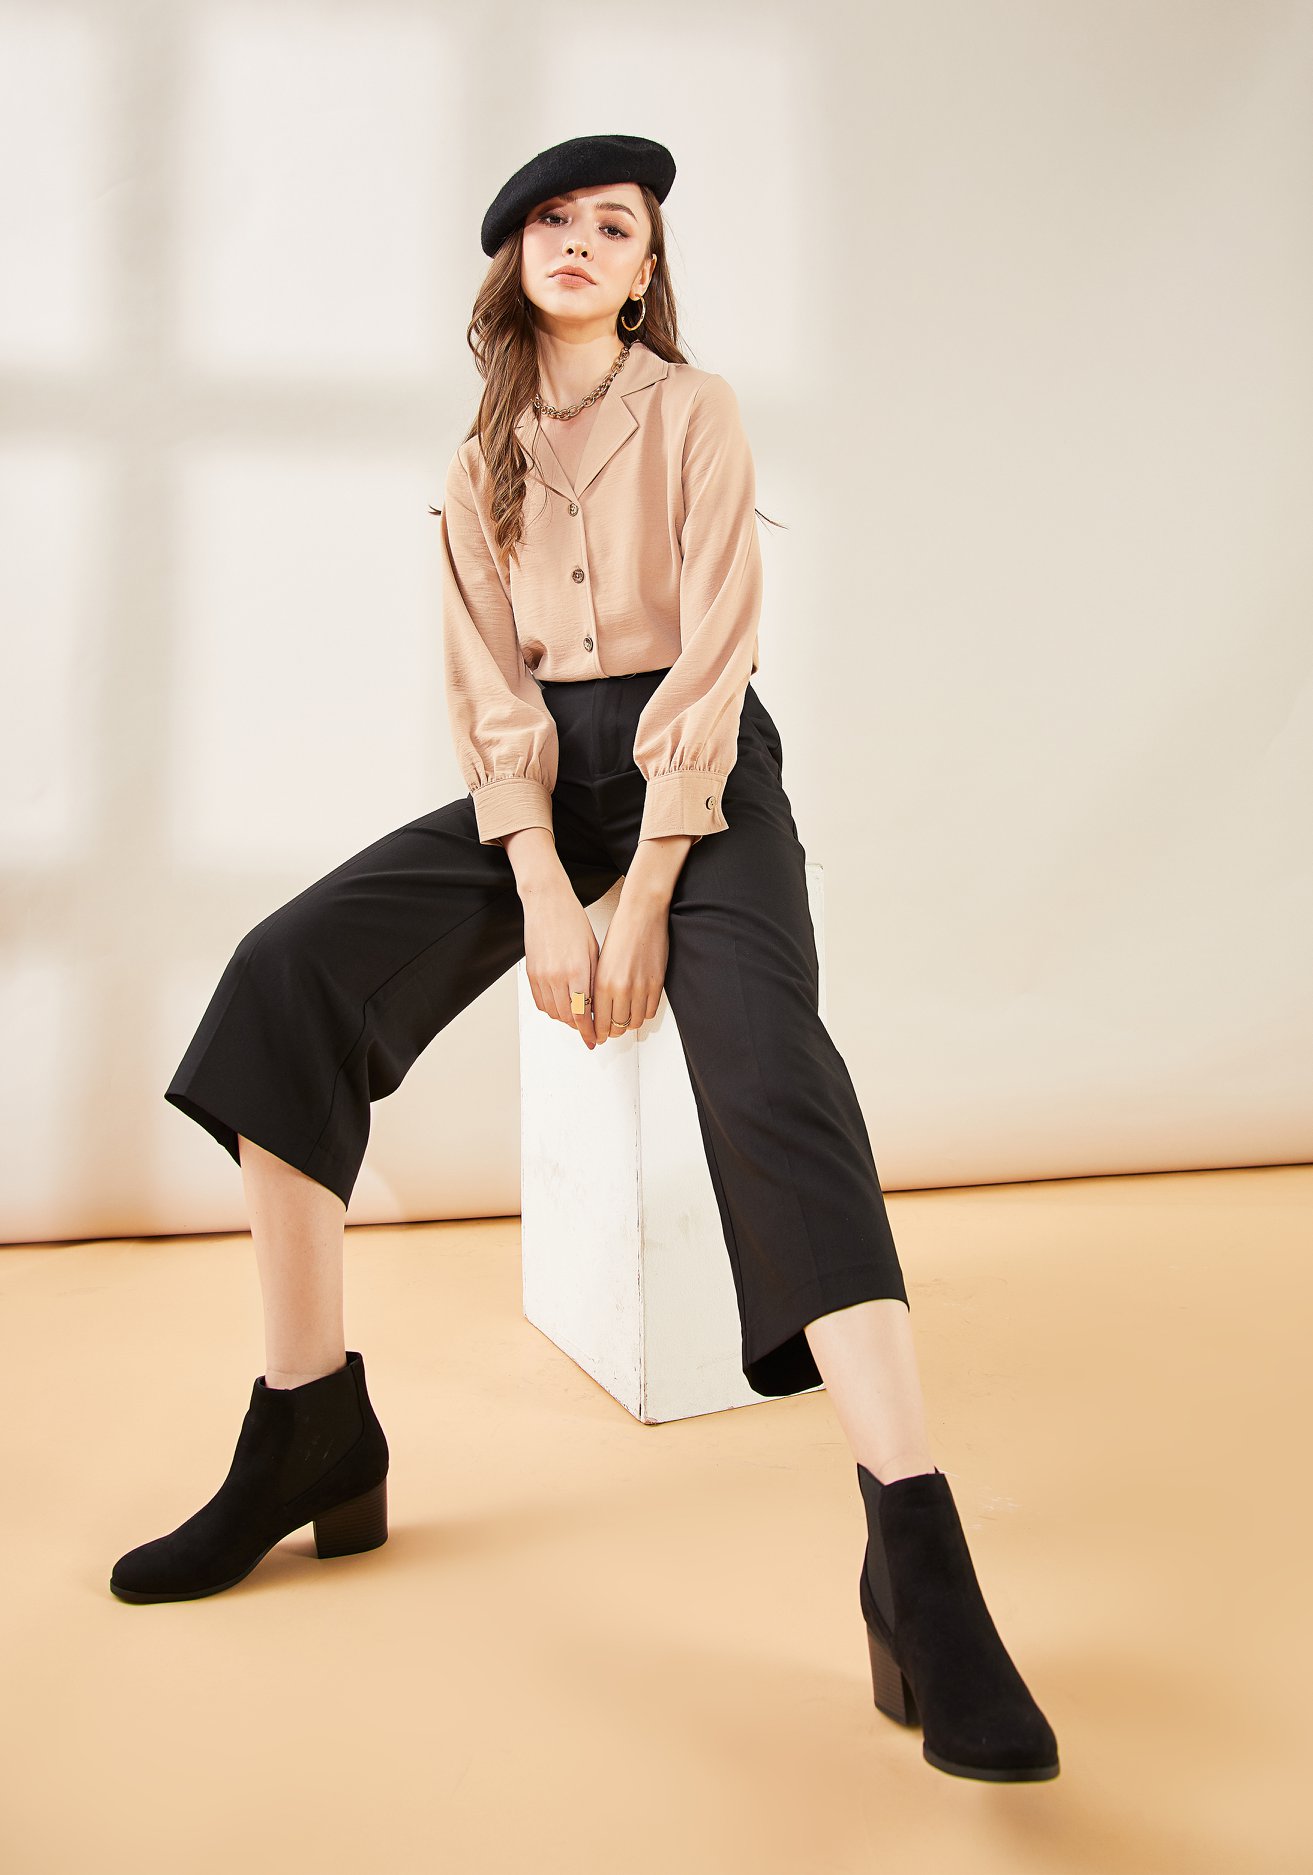 MIKI FOR WOMAN – PANTS COLLECTION